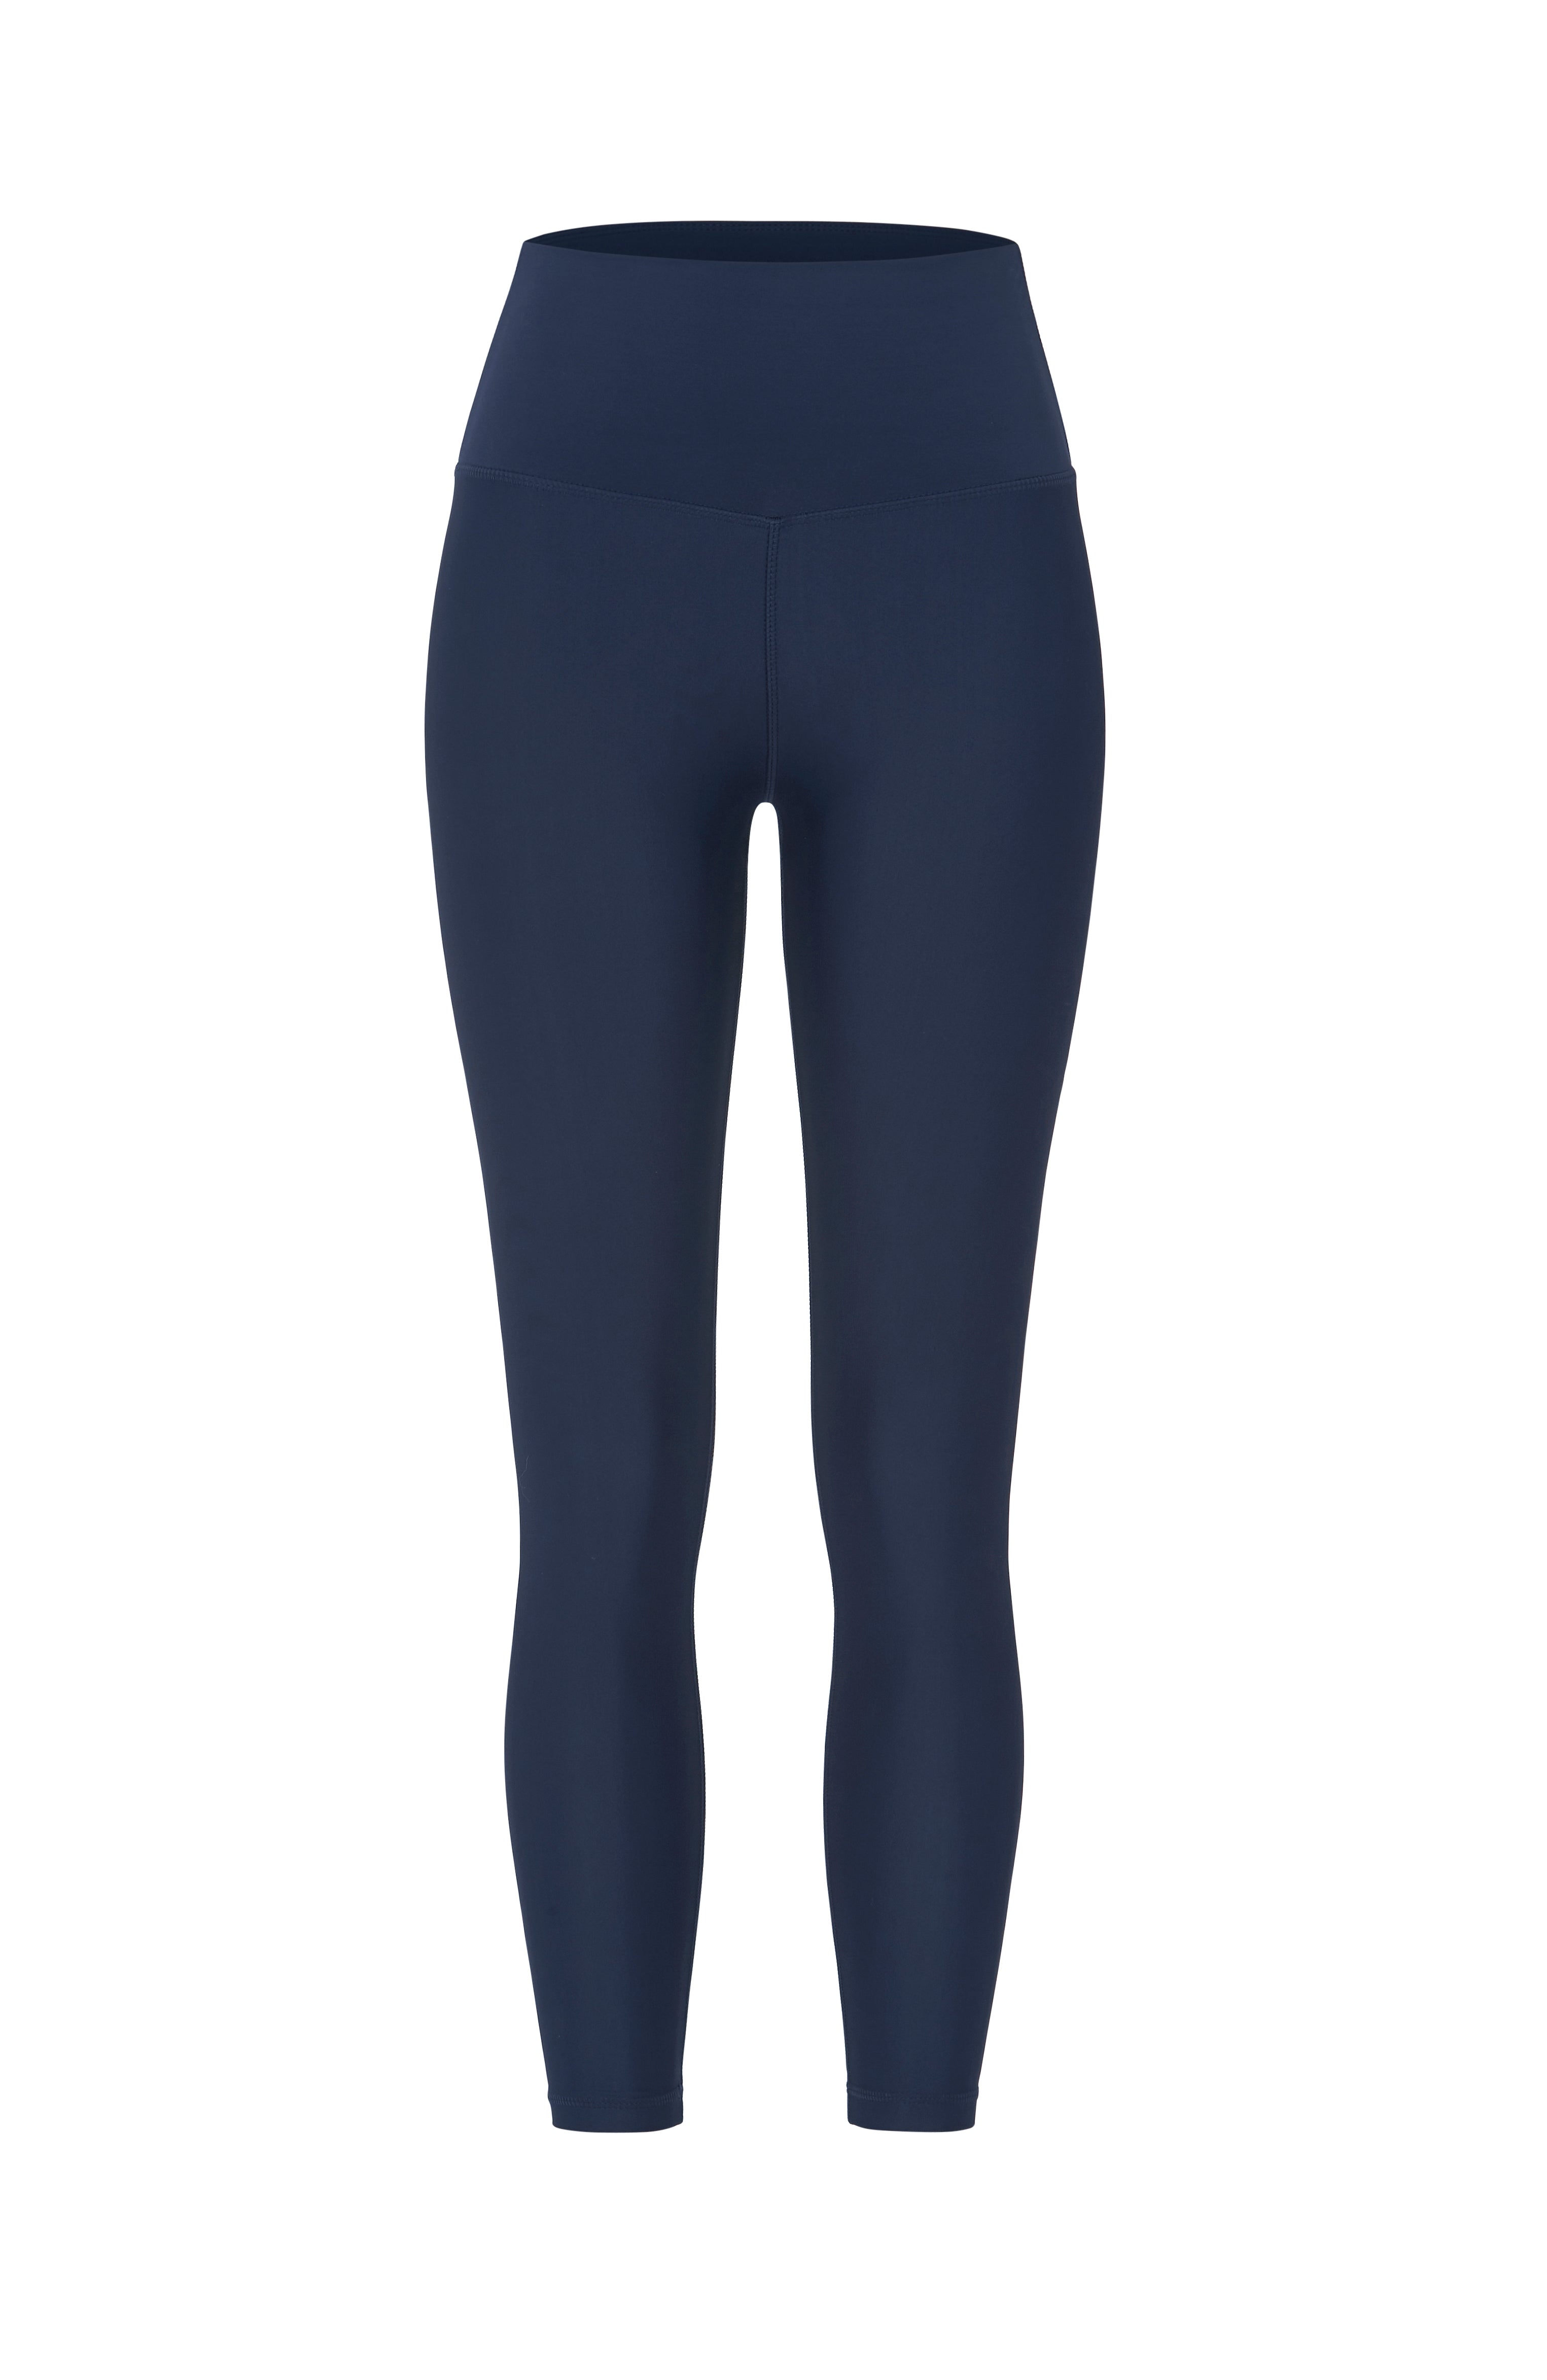 Sisterly Tribe - Classic 7/8 Tights Navy. Buttery soft and Body sculpting, Soft, matte fabric that feels like a second skin, Compression that follows your every move.